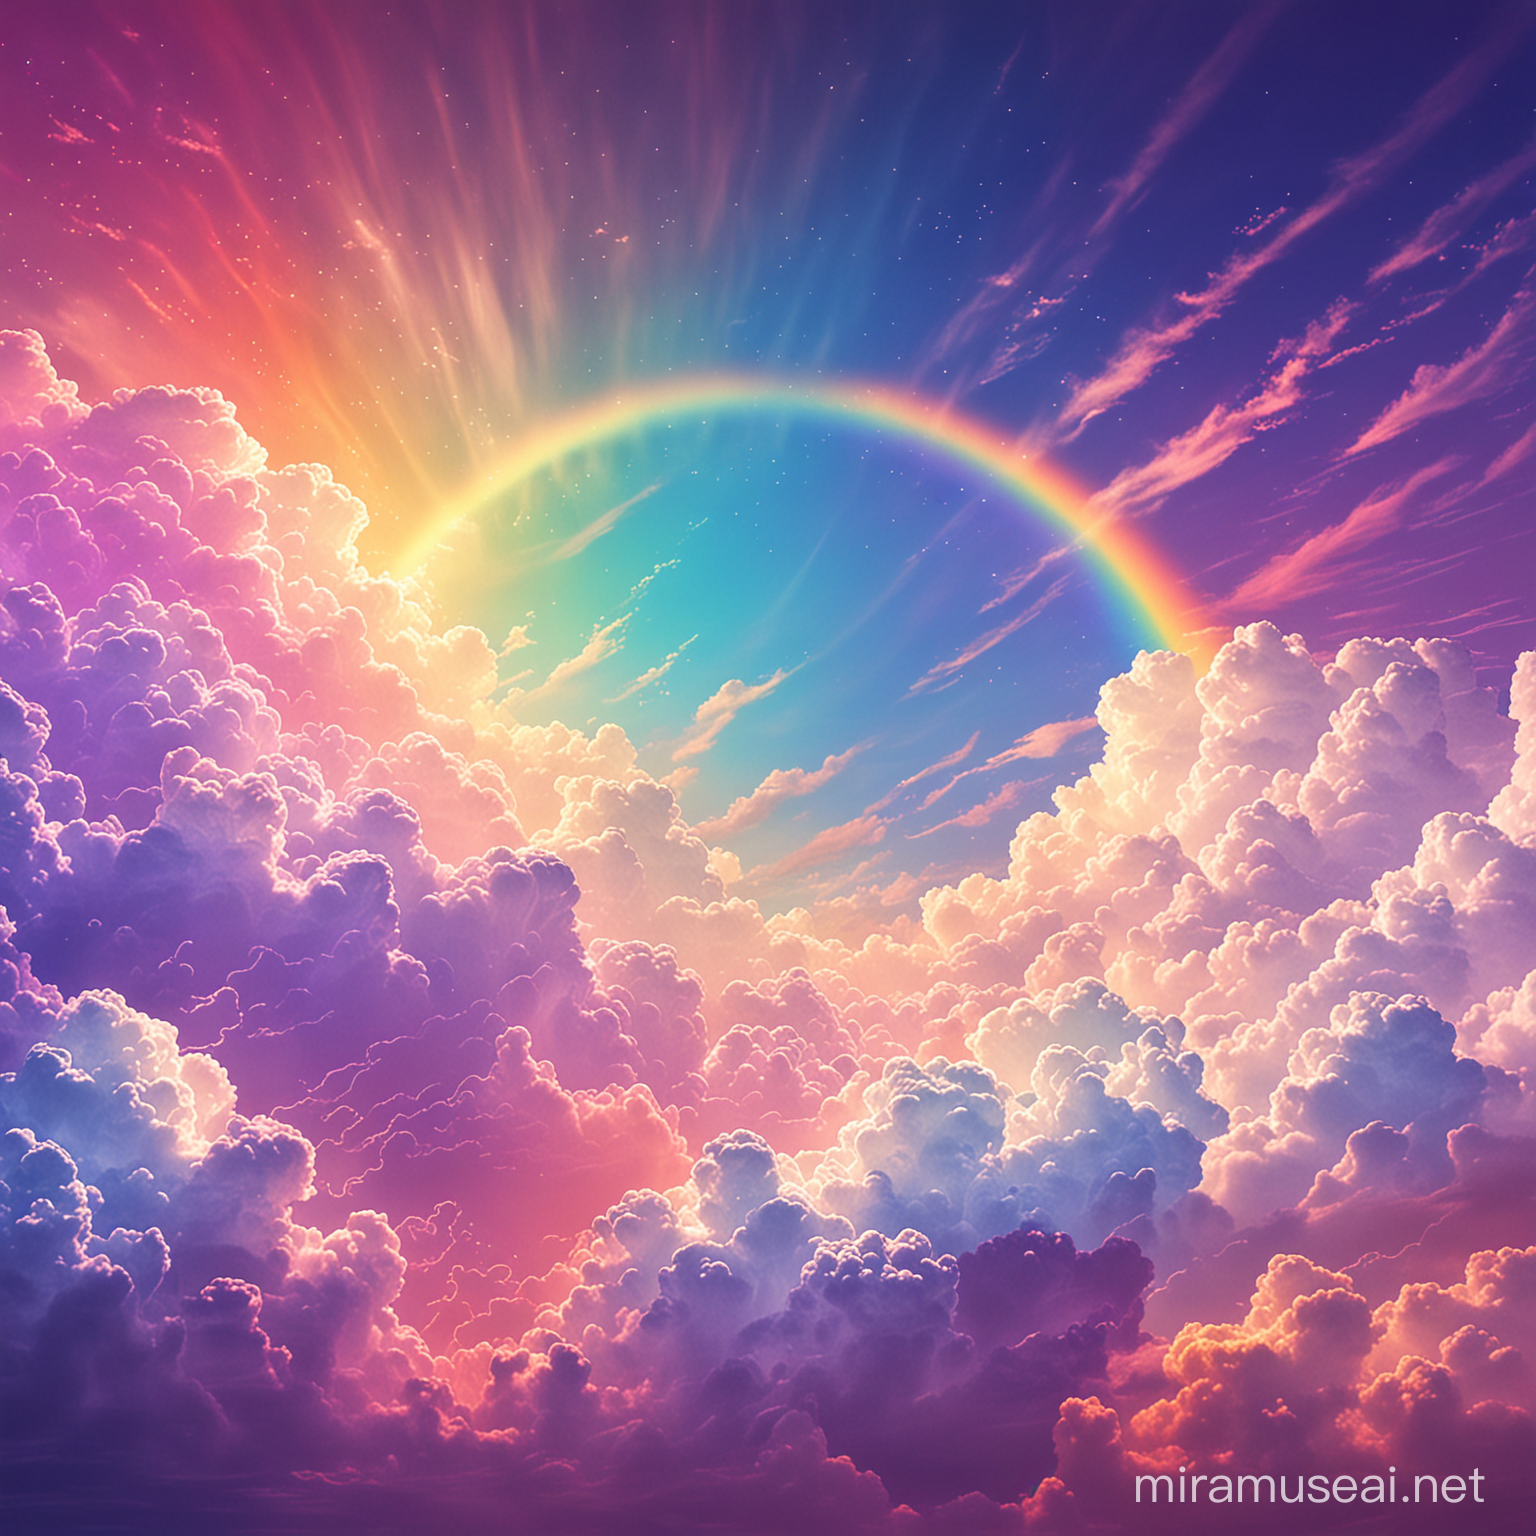 Vibrant Rainbow Clouds Painting A Surreal Sky Landscape